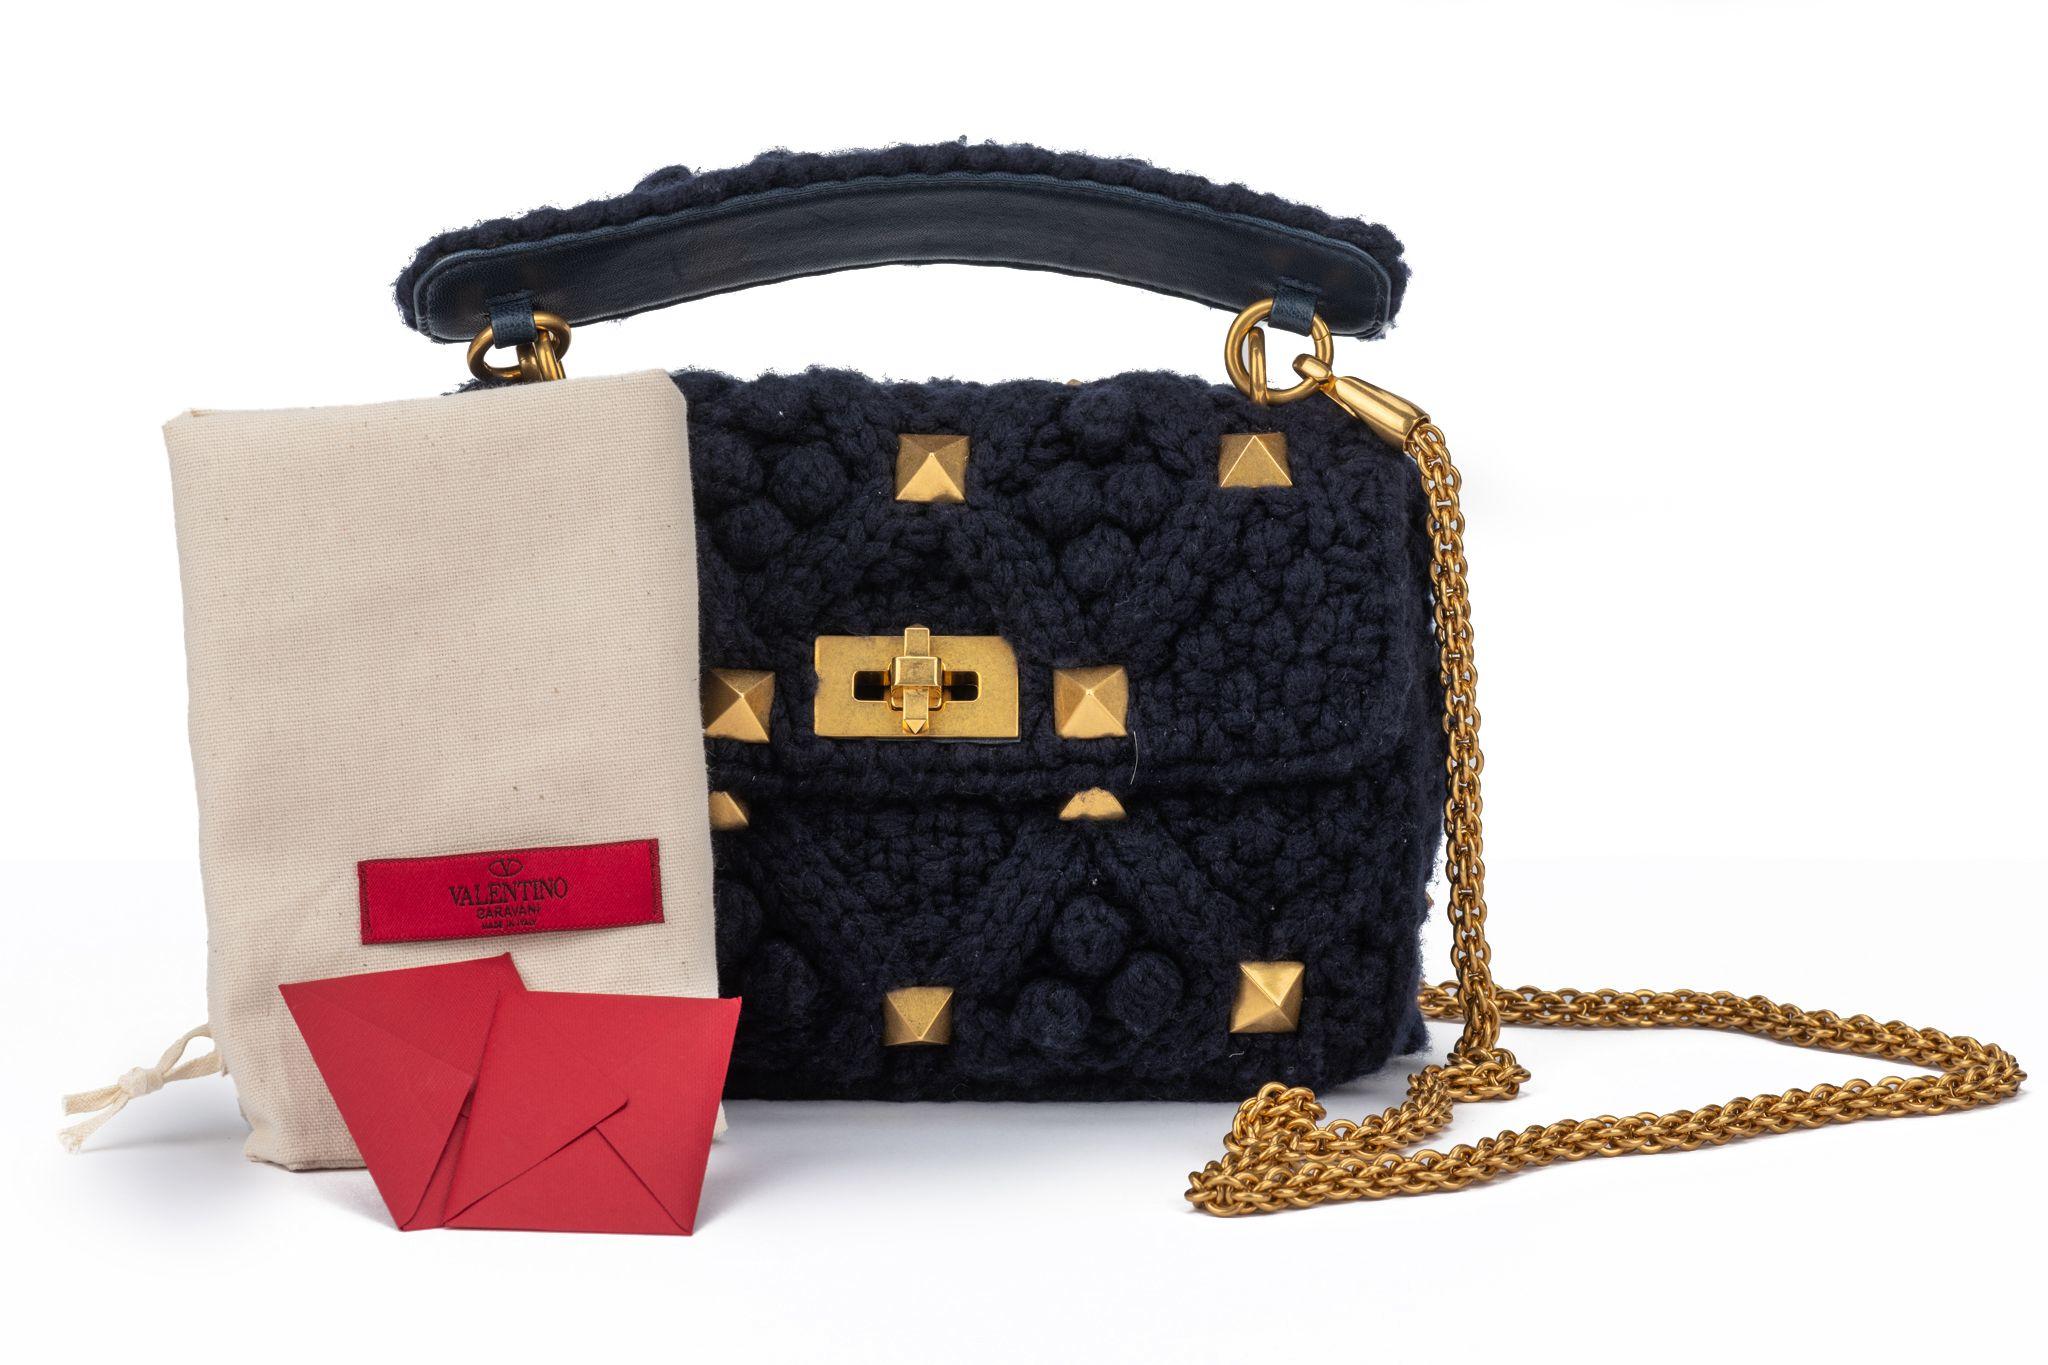 Valentino Roman Stud Collection in navy blue cashmere. Diamond-quilted shoulder bag with gold tone studs and a versatile top handle and cross body strap (25.6') combination. The bag is new and comes with the original dustcover.